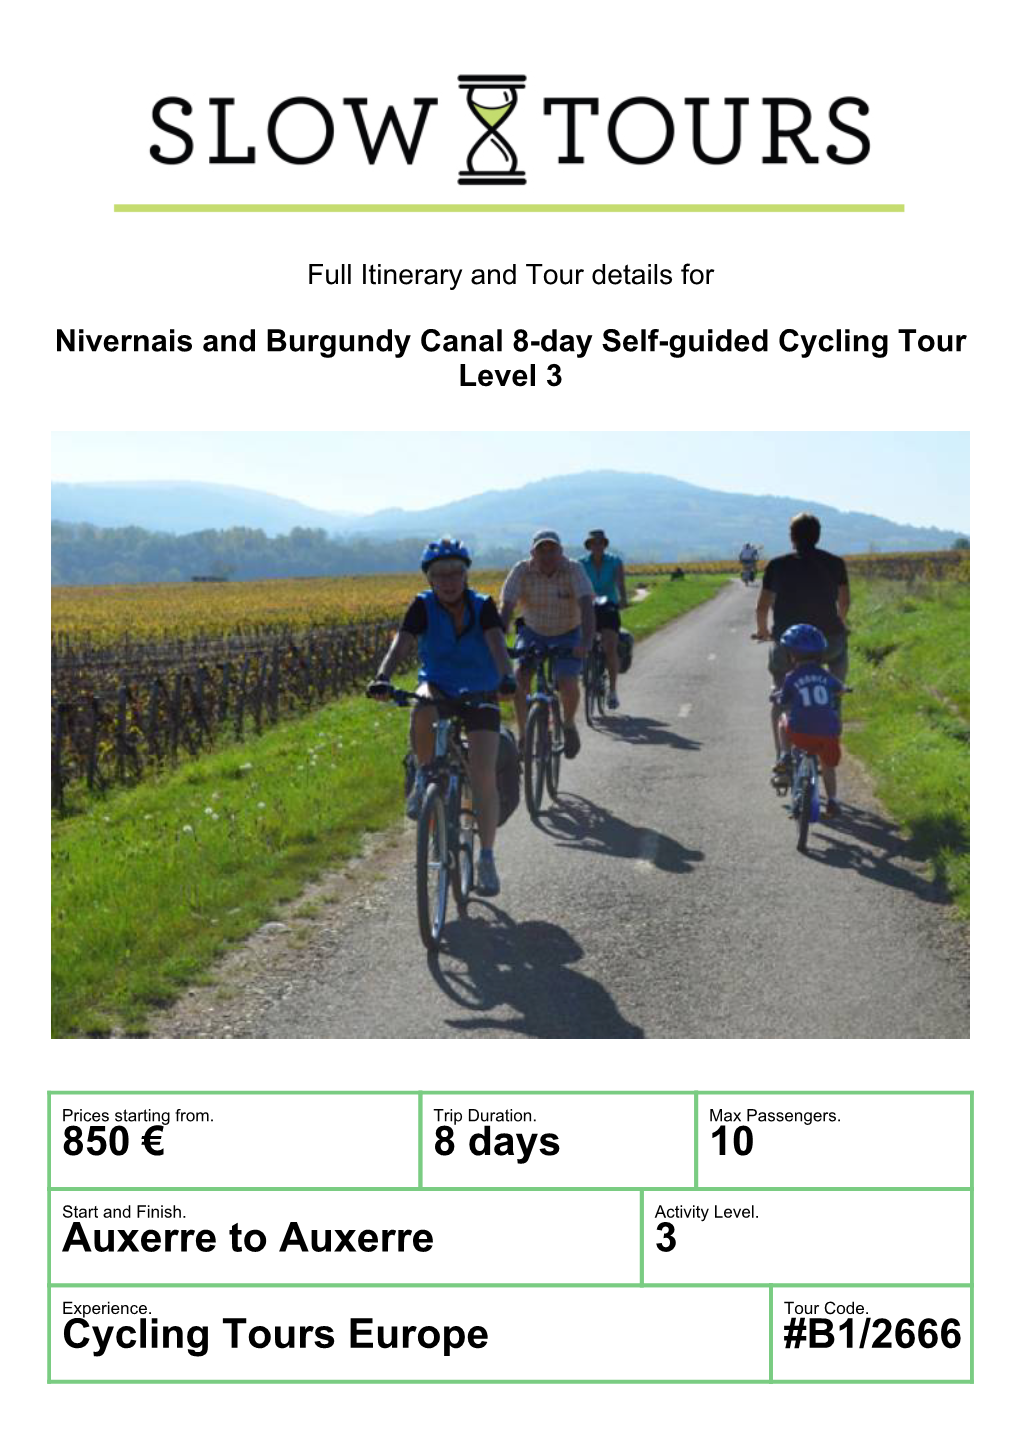 850 € 8 Days 10 Auxerre to Auxerre 3 Cycling Tours Europe #B1/2666